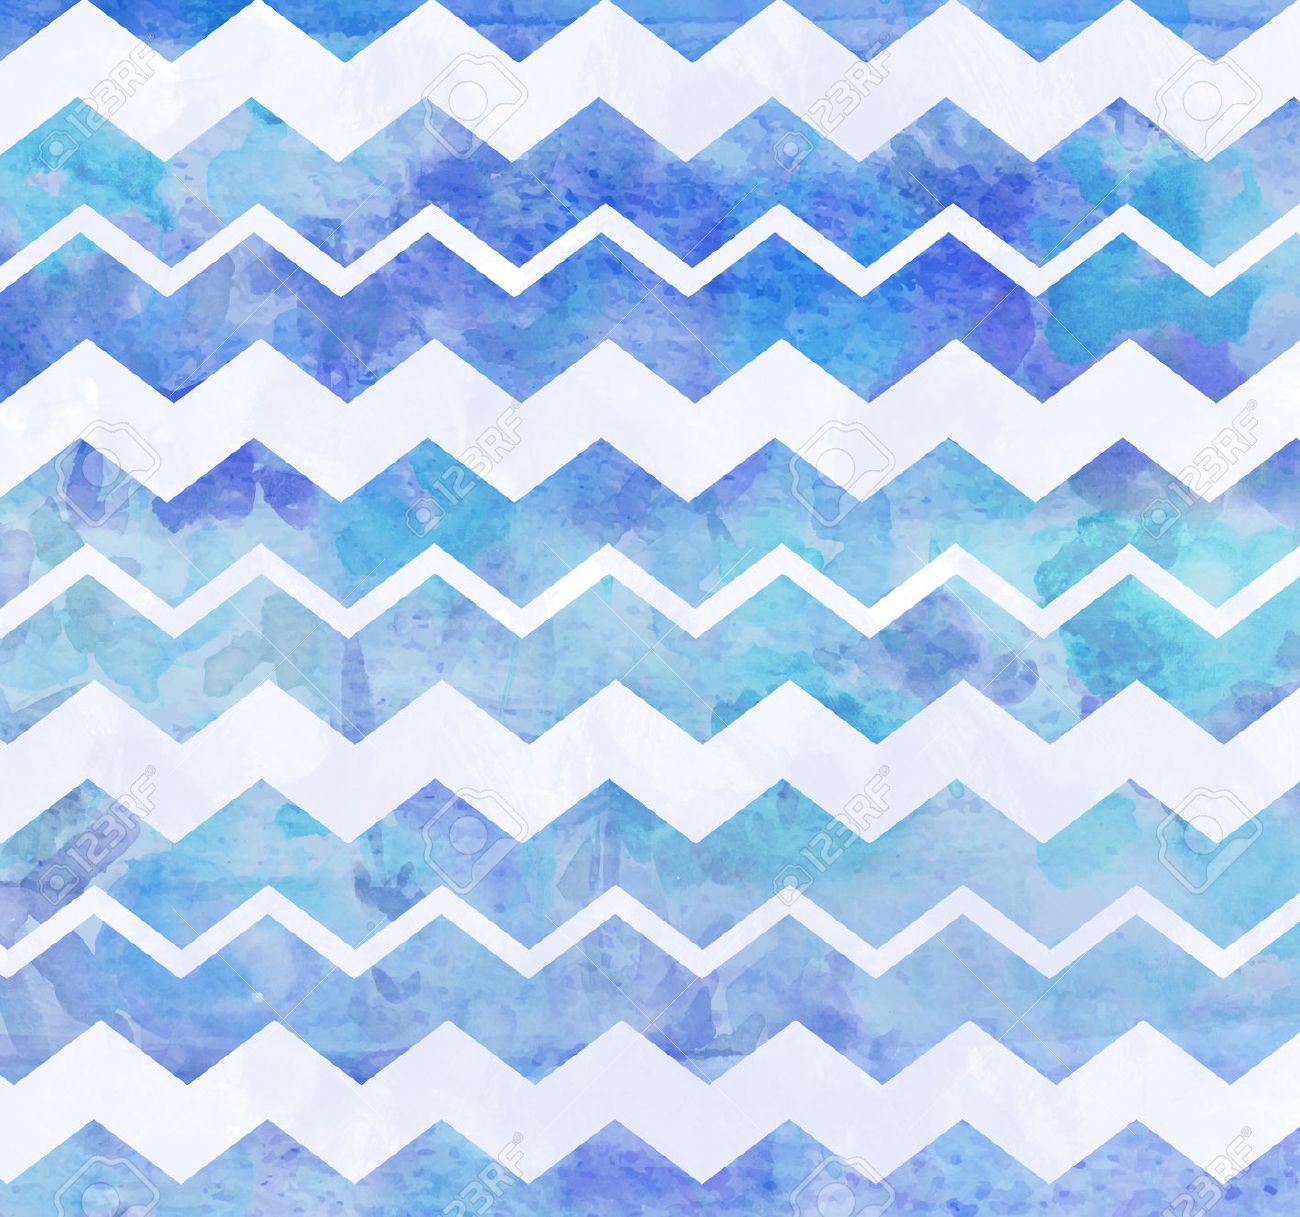 Blue Watercolor Chevron Background Stock Photo Picture And